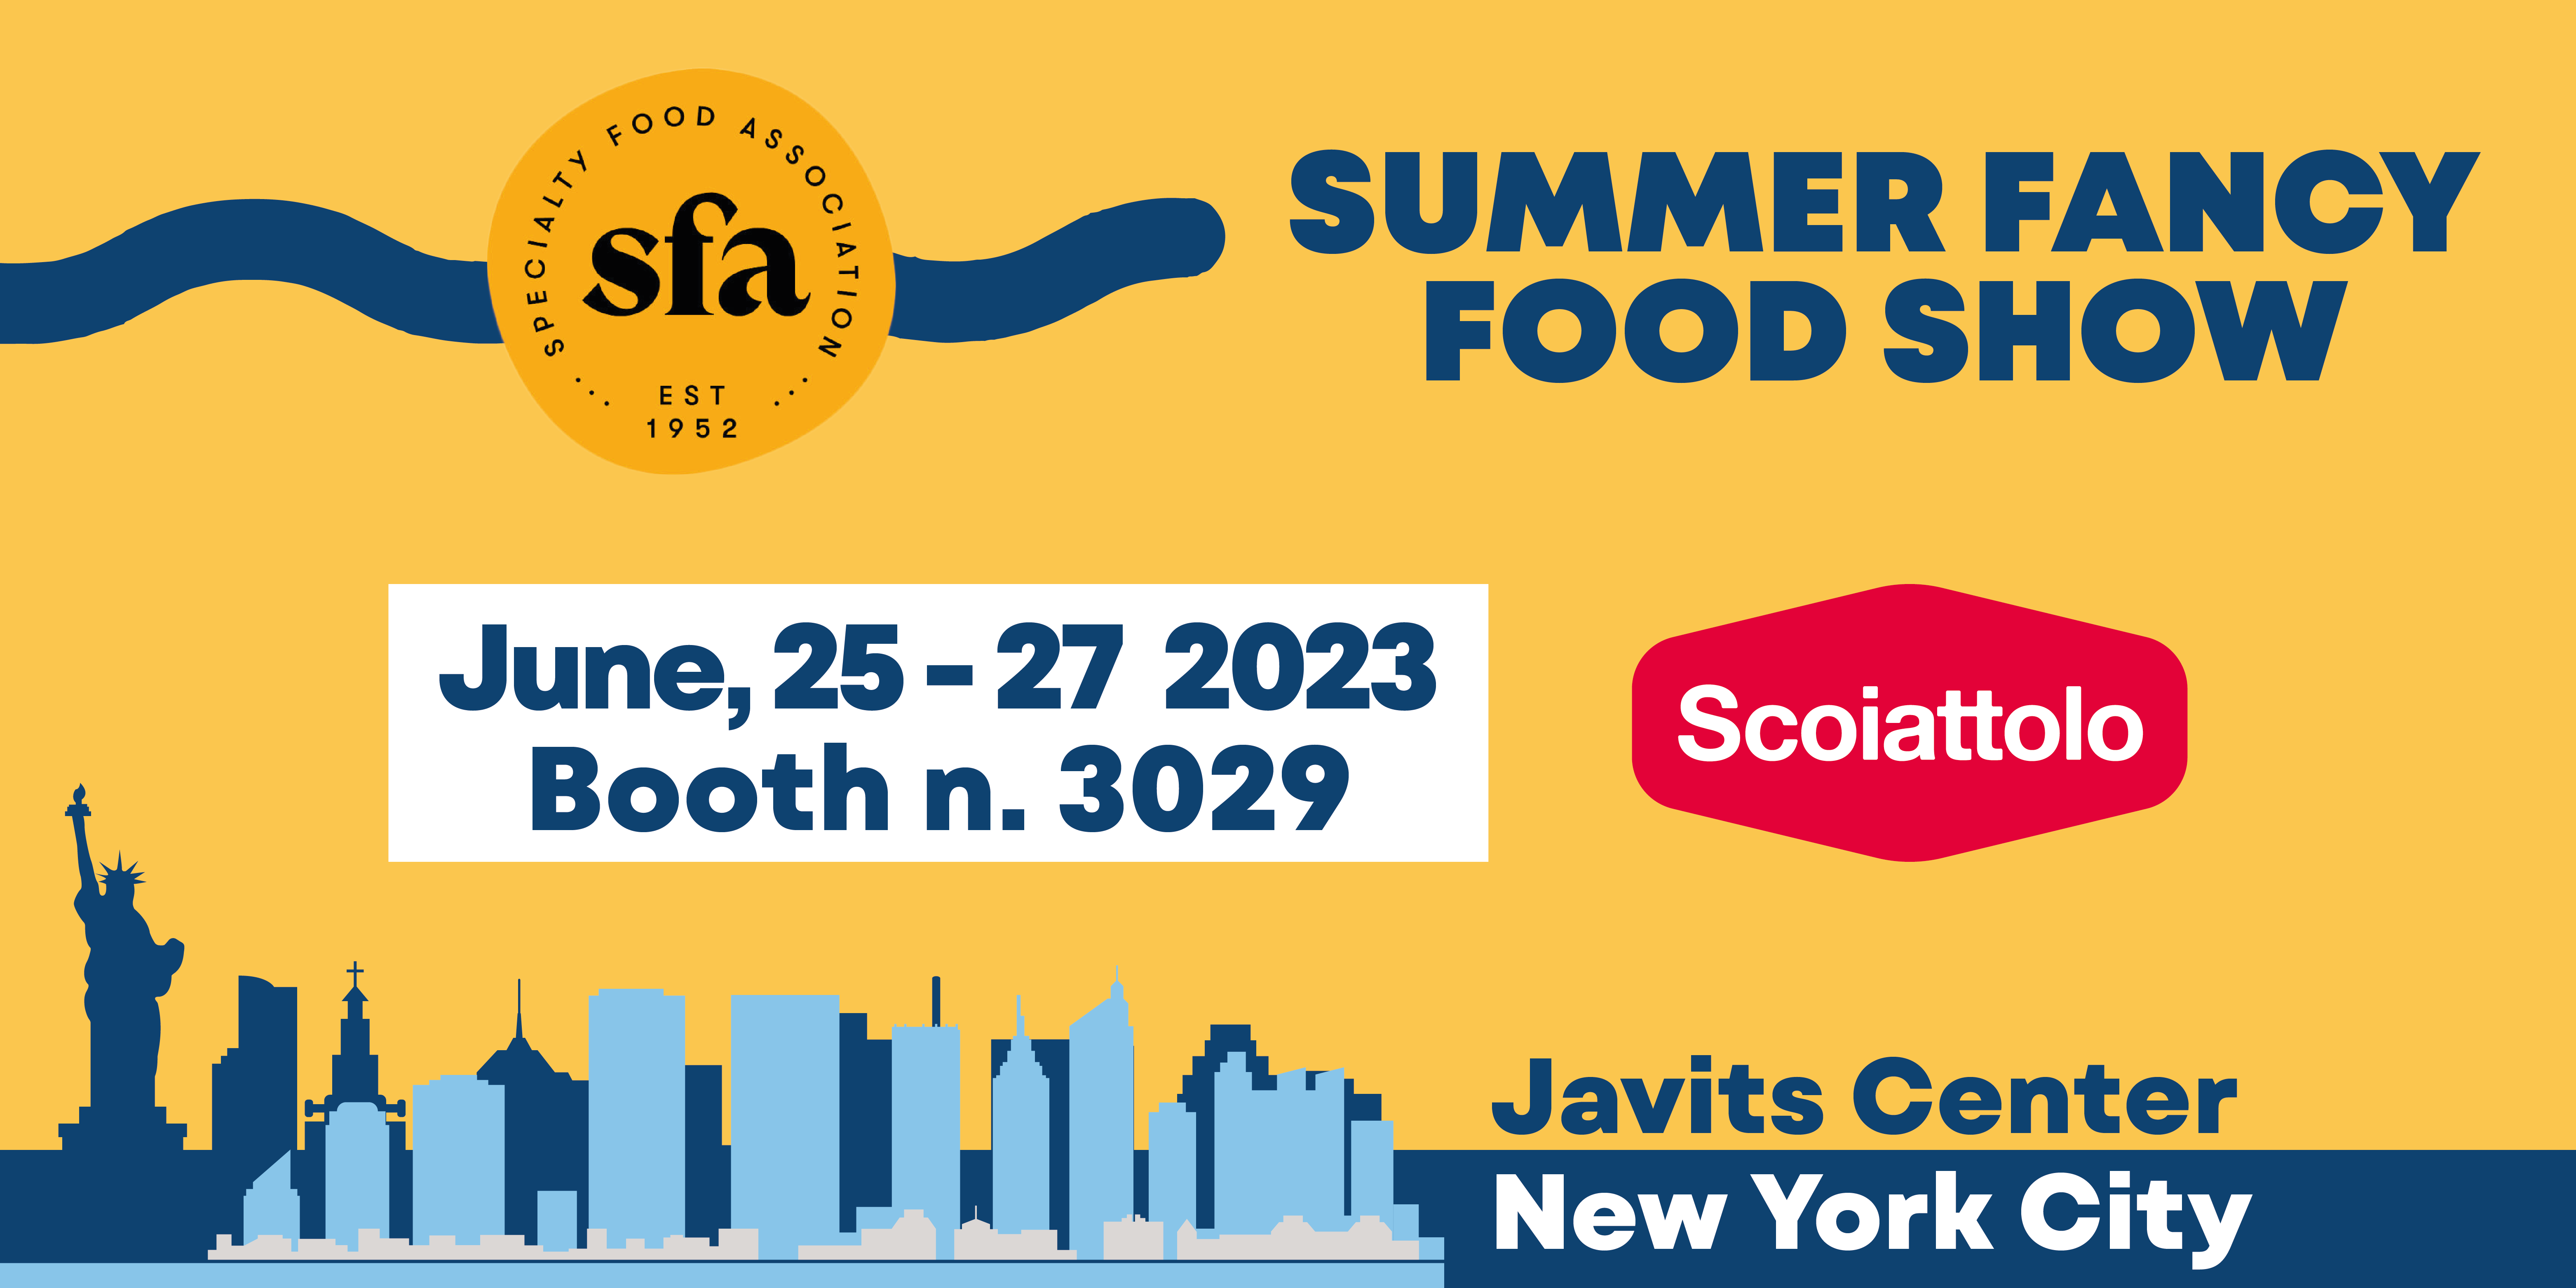 SCOIATTOLO AT SUMMER FANCY FOOD SHOW 2023: <br> from 25 to 27 June in New York